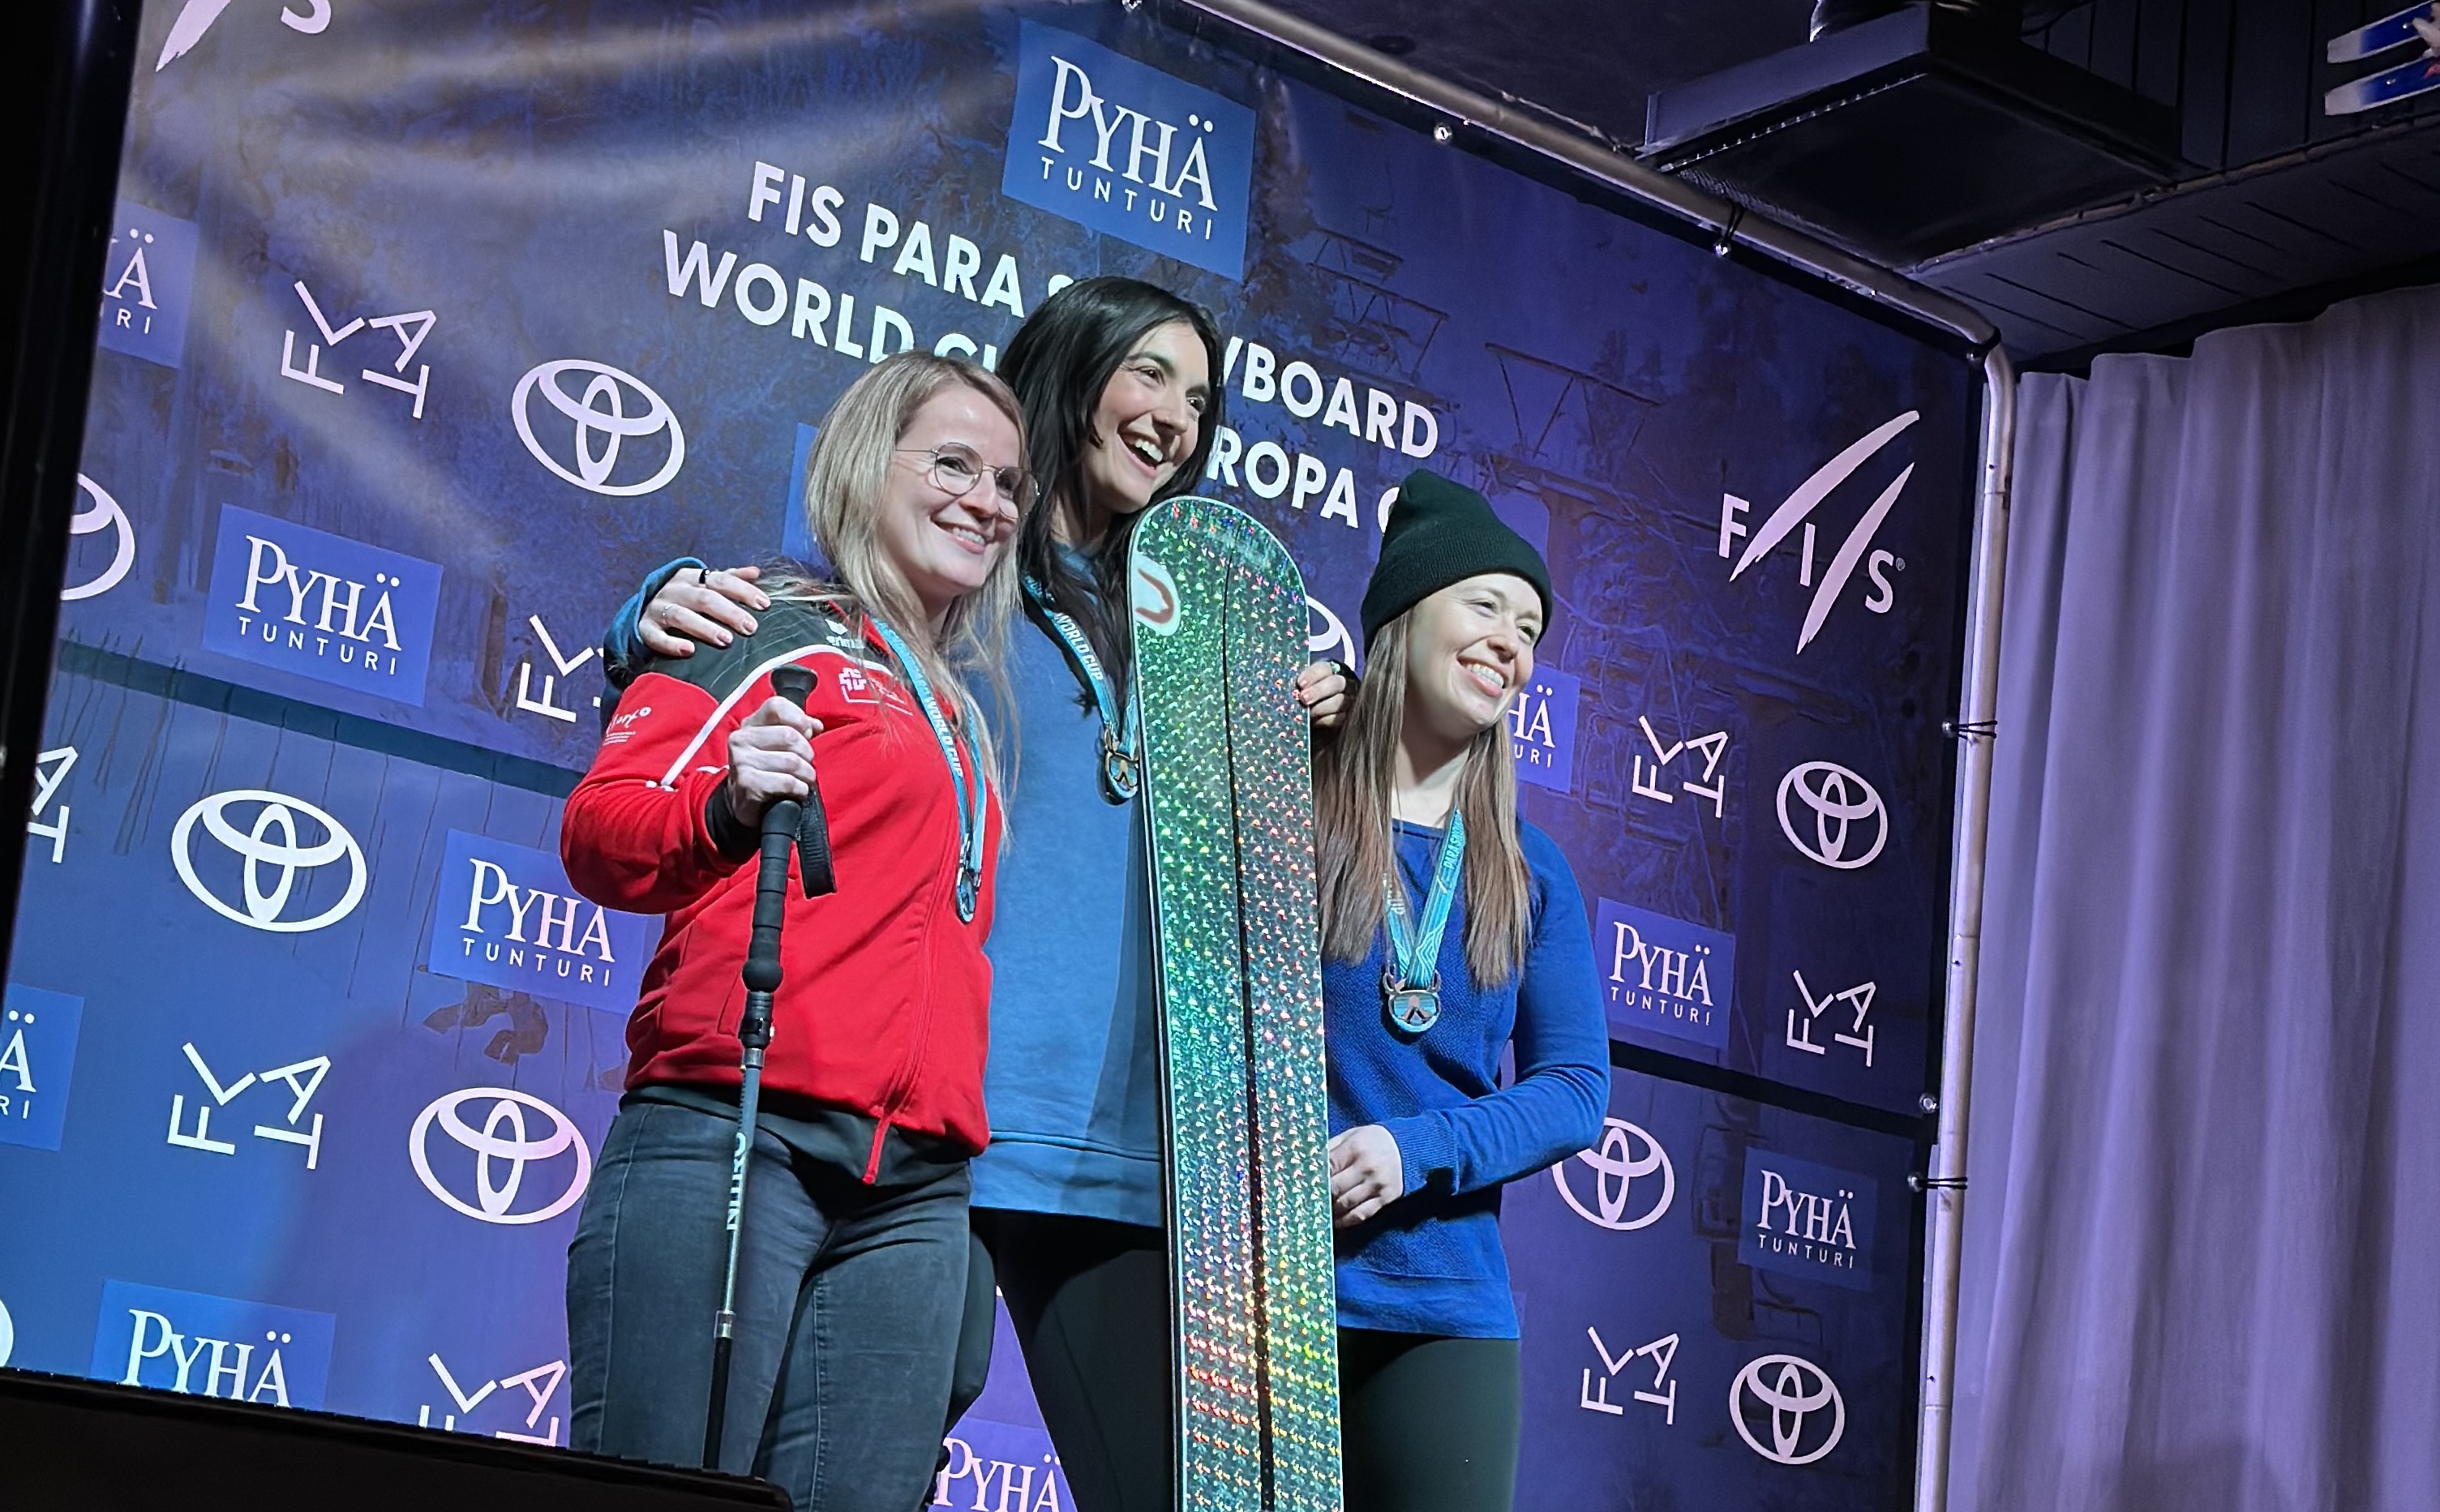 Brenna Huckaby and Dennae Russell of the U.S. stand on the podium in Pyhä